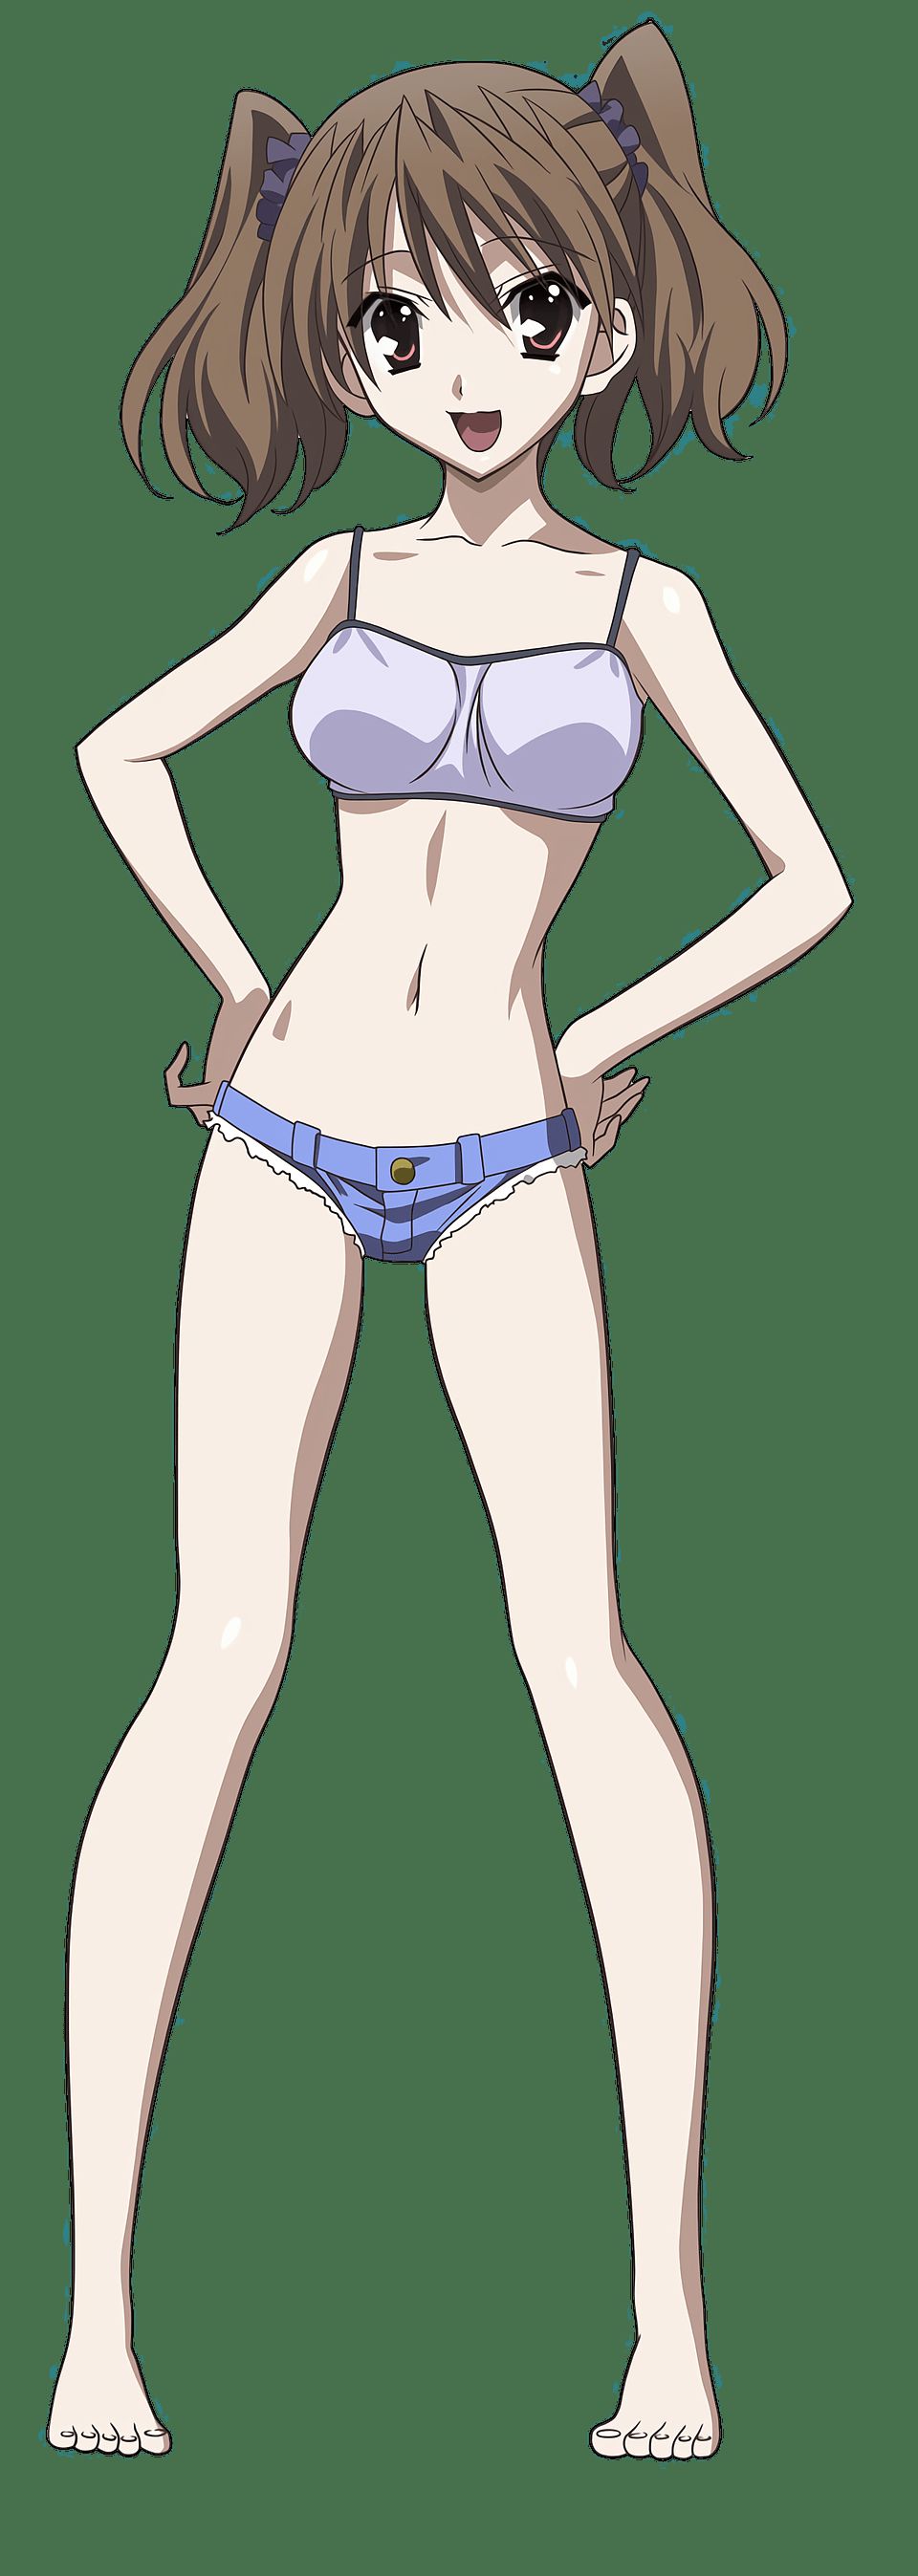 【Erotica Character Material】 PNG Background Transparent Erotic Image of Anime Character Part 410 16